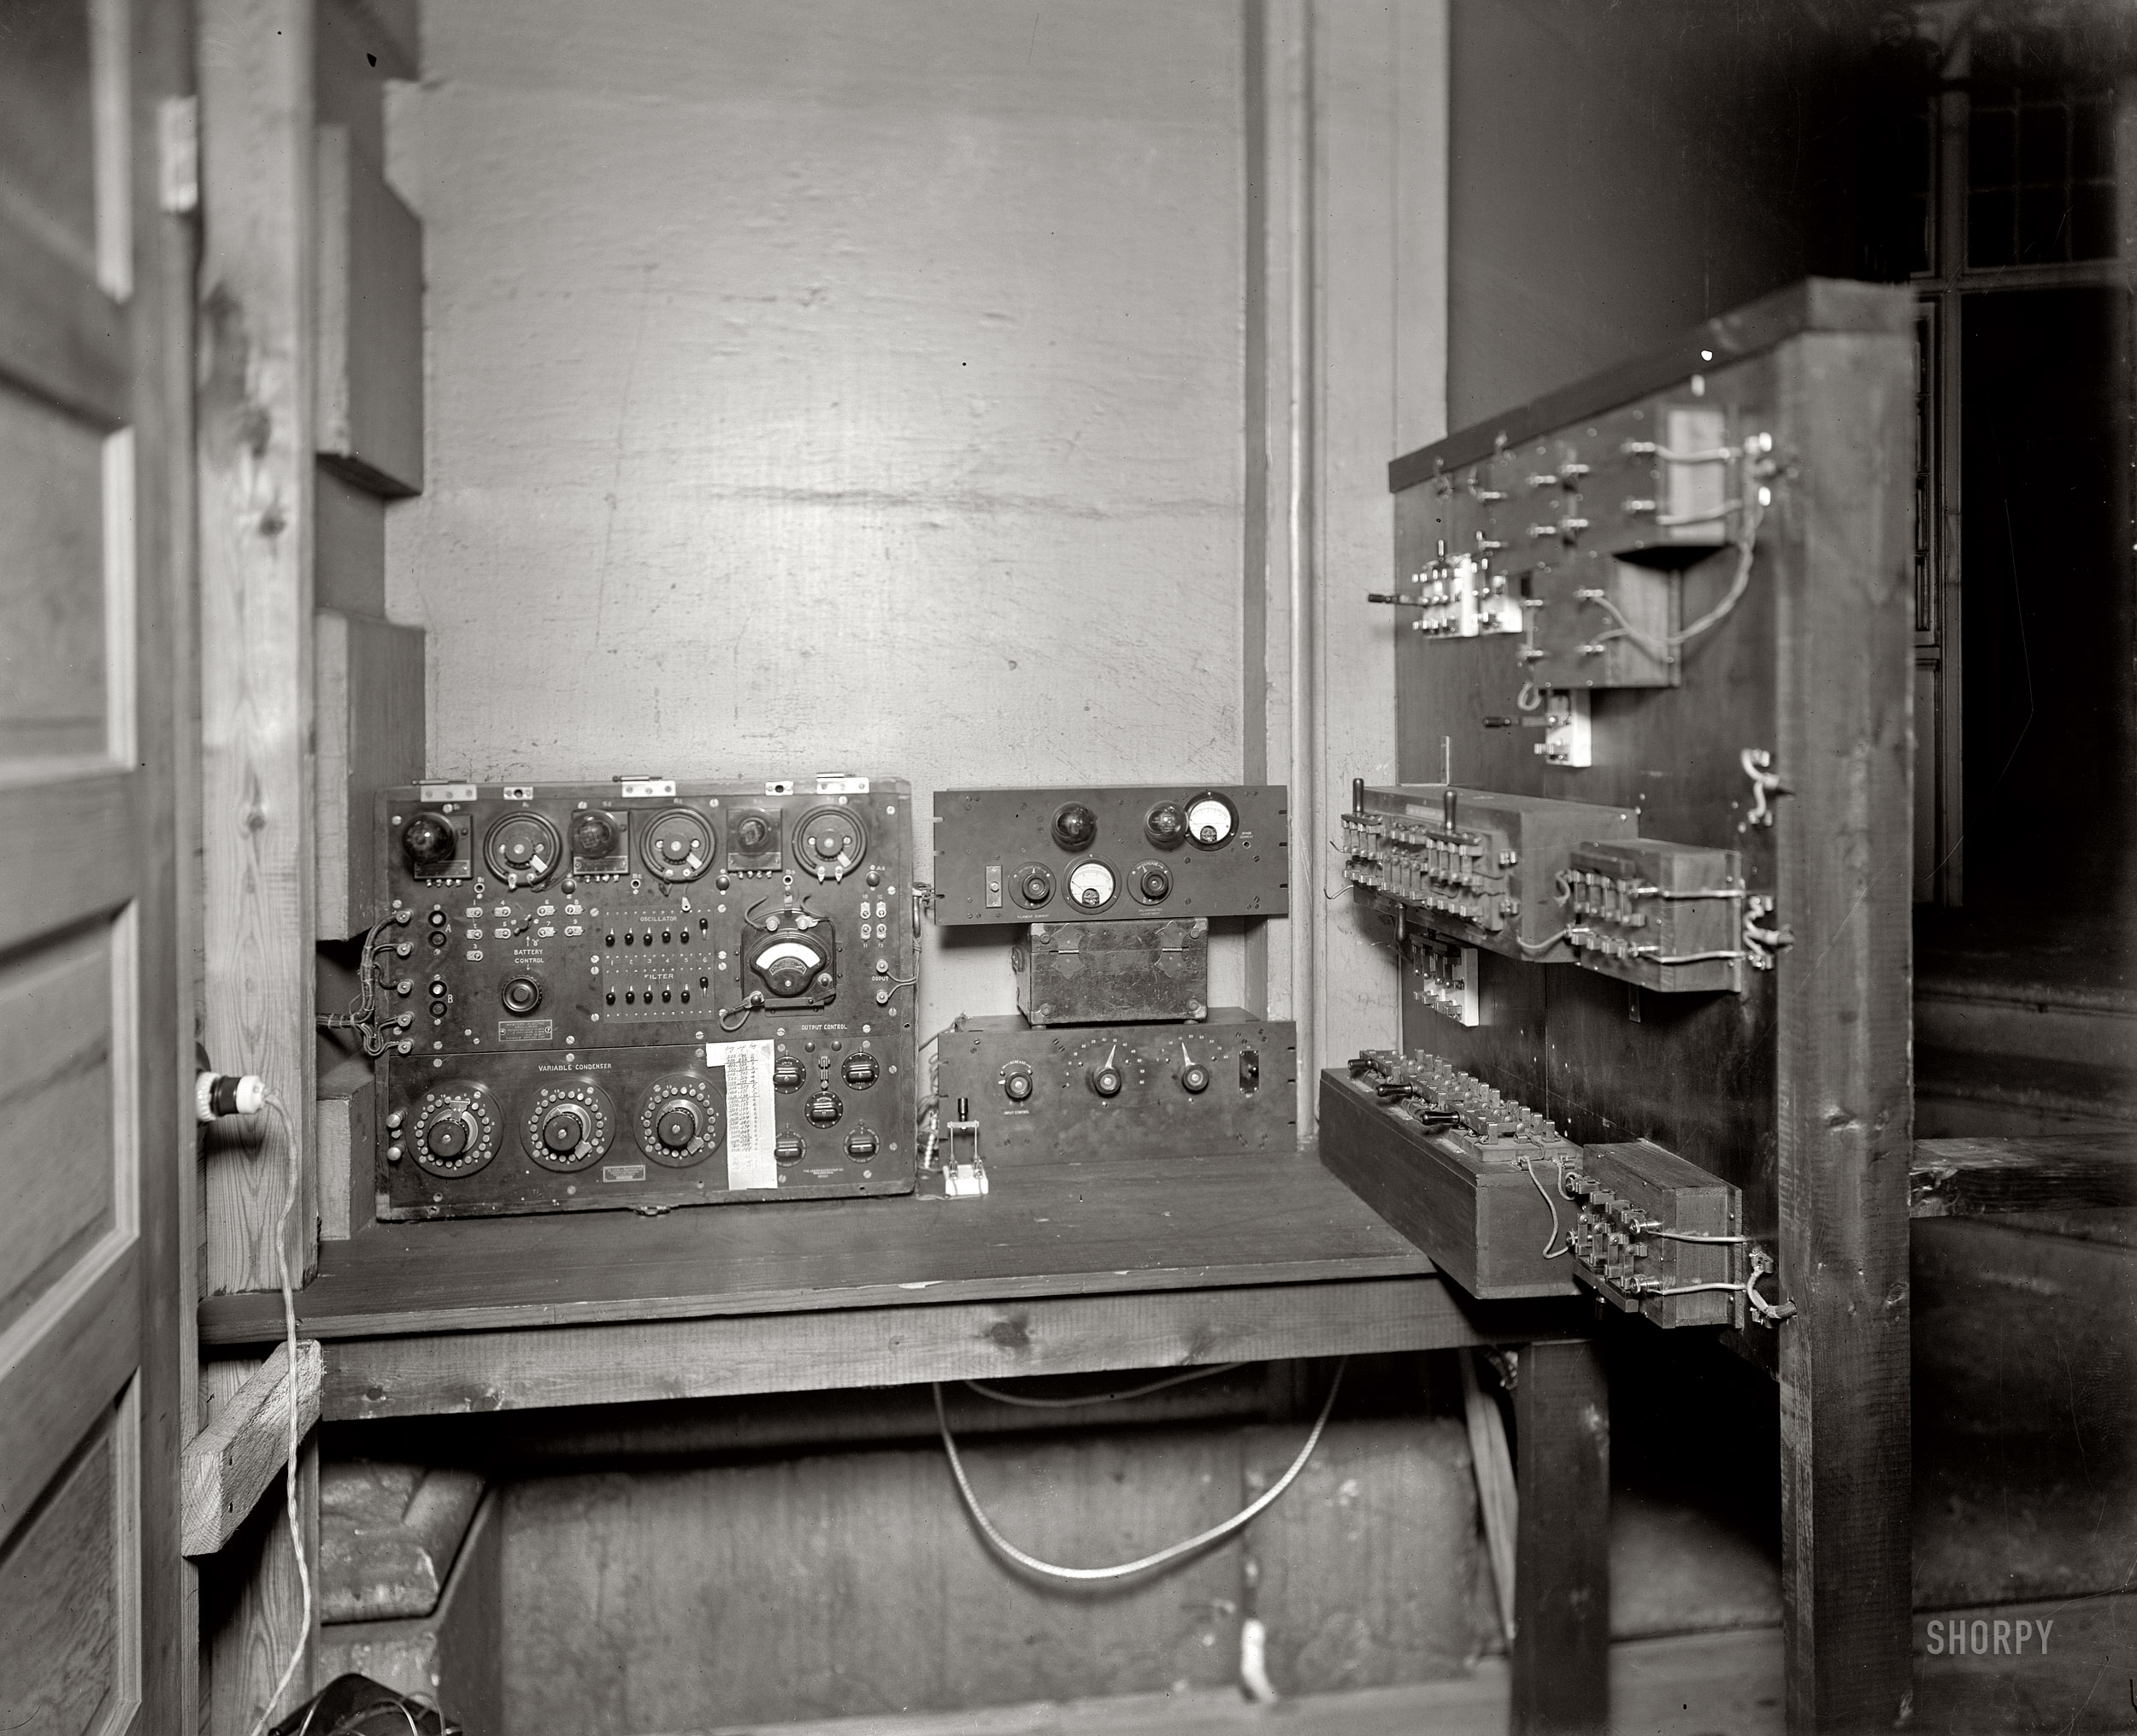 Washington, D.C., circa 1919. "Chesapeake & Potomac Telephone Co. equipment."  More communications gear at what seems to be the Capitol. The box on the left bears the nameplates of Leeds & Northrup, Philadelphia, and Western Electric. Harris & Ewing Collection glass negative. View full size | The knobs.